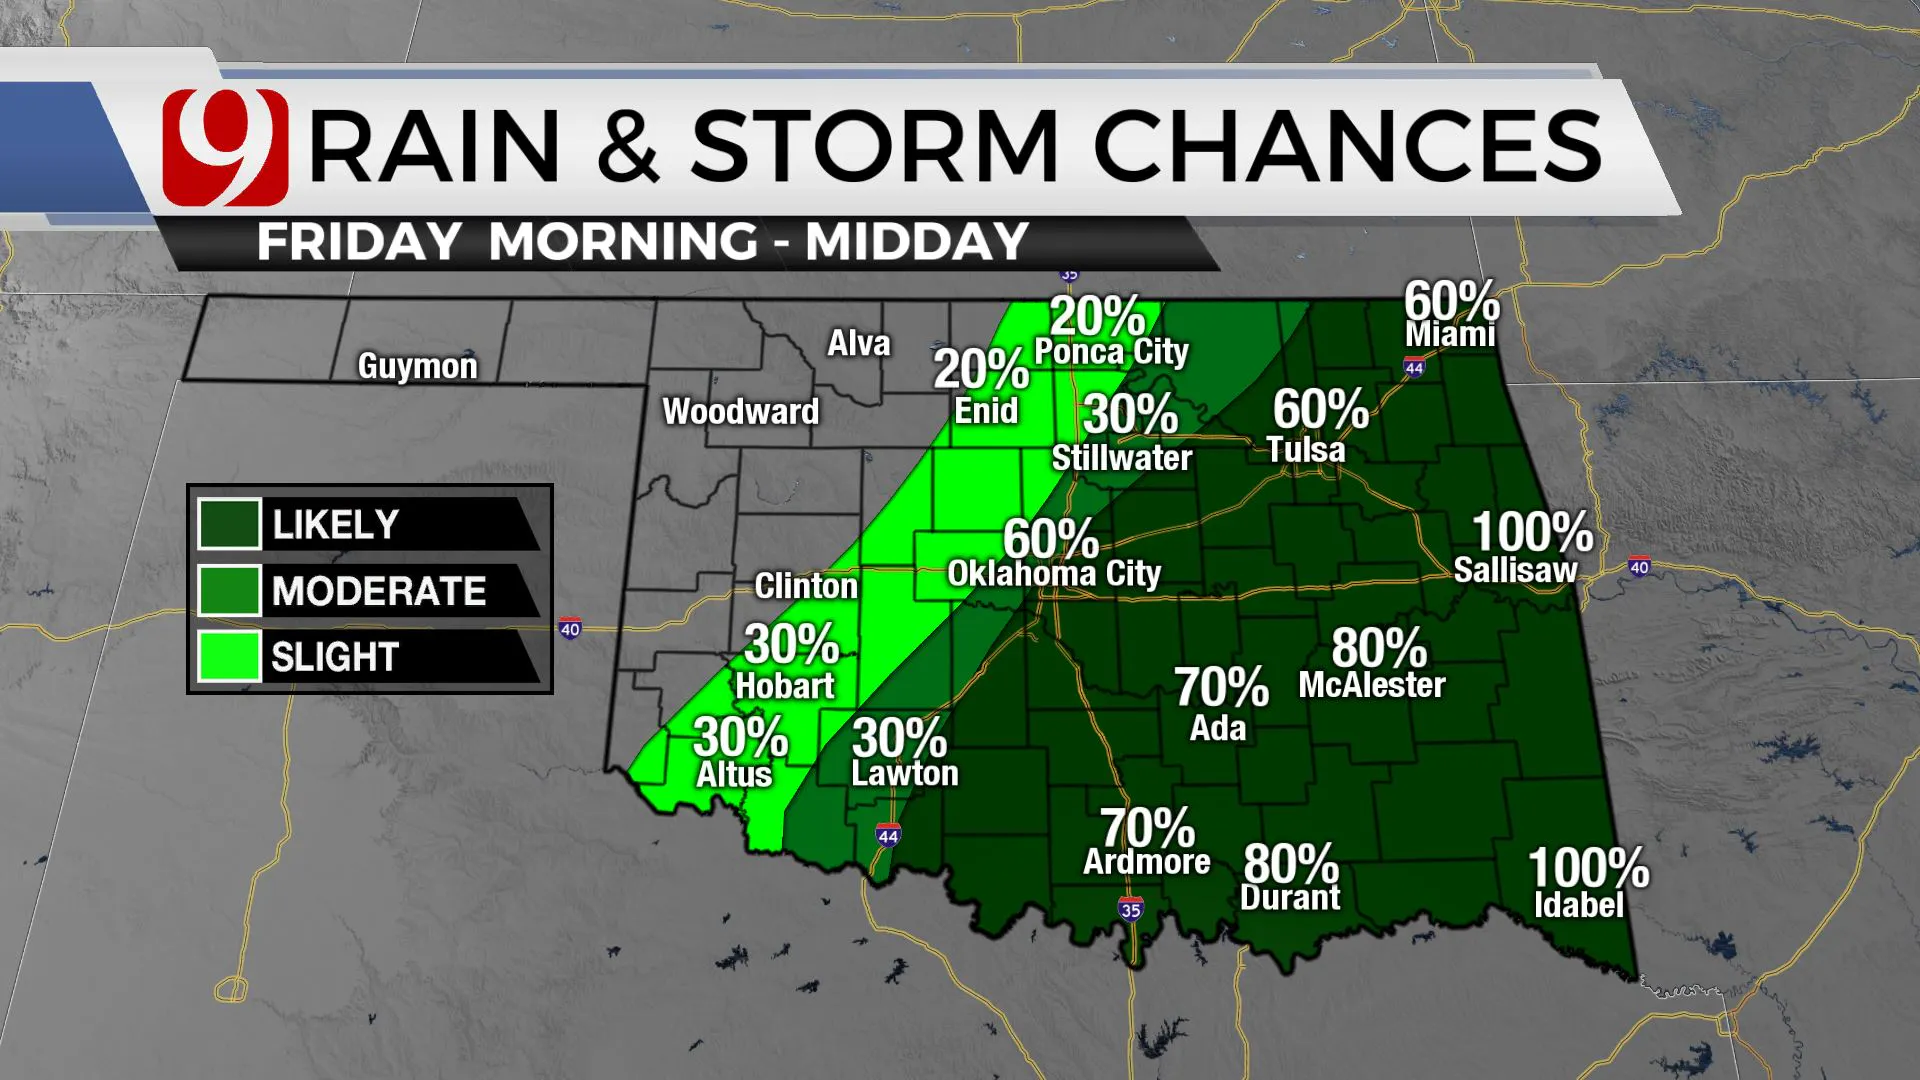 Rain and storm chances Friday morning.